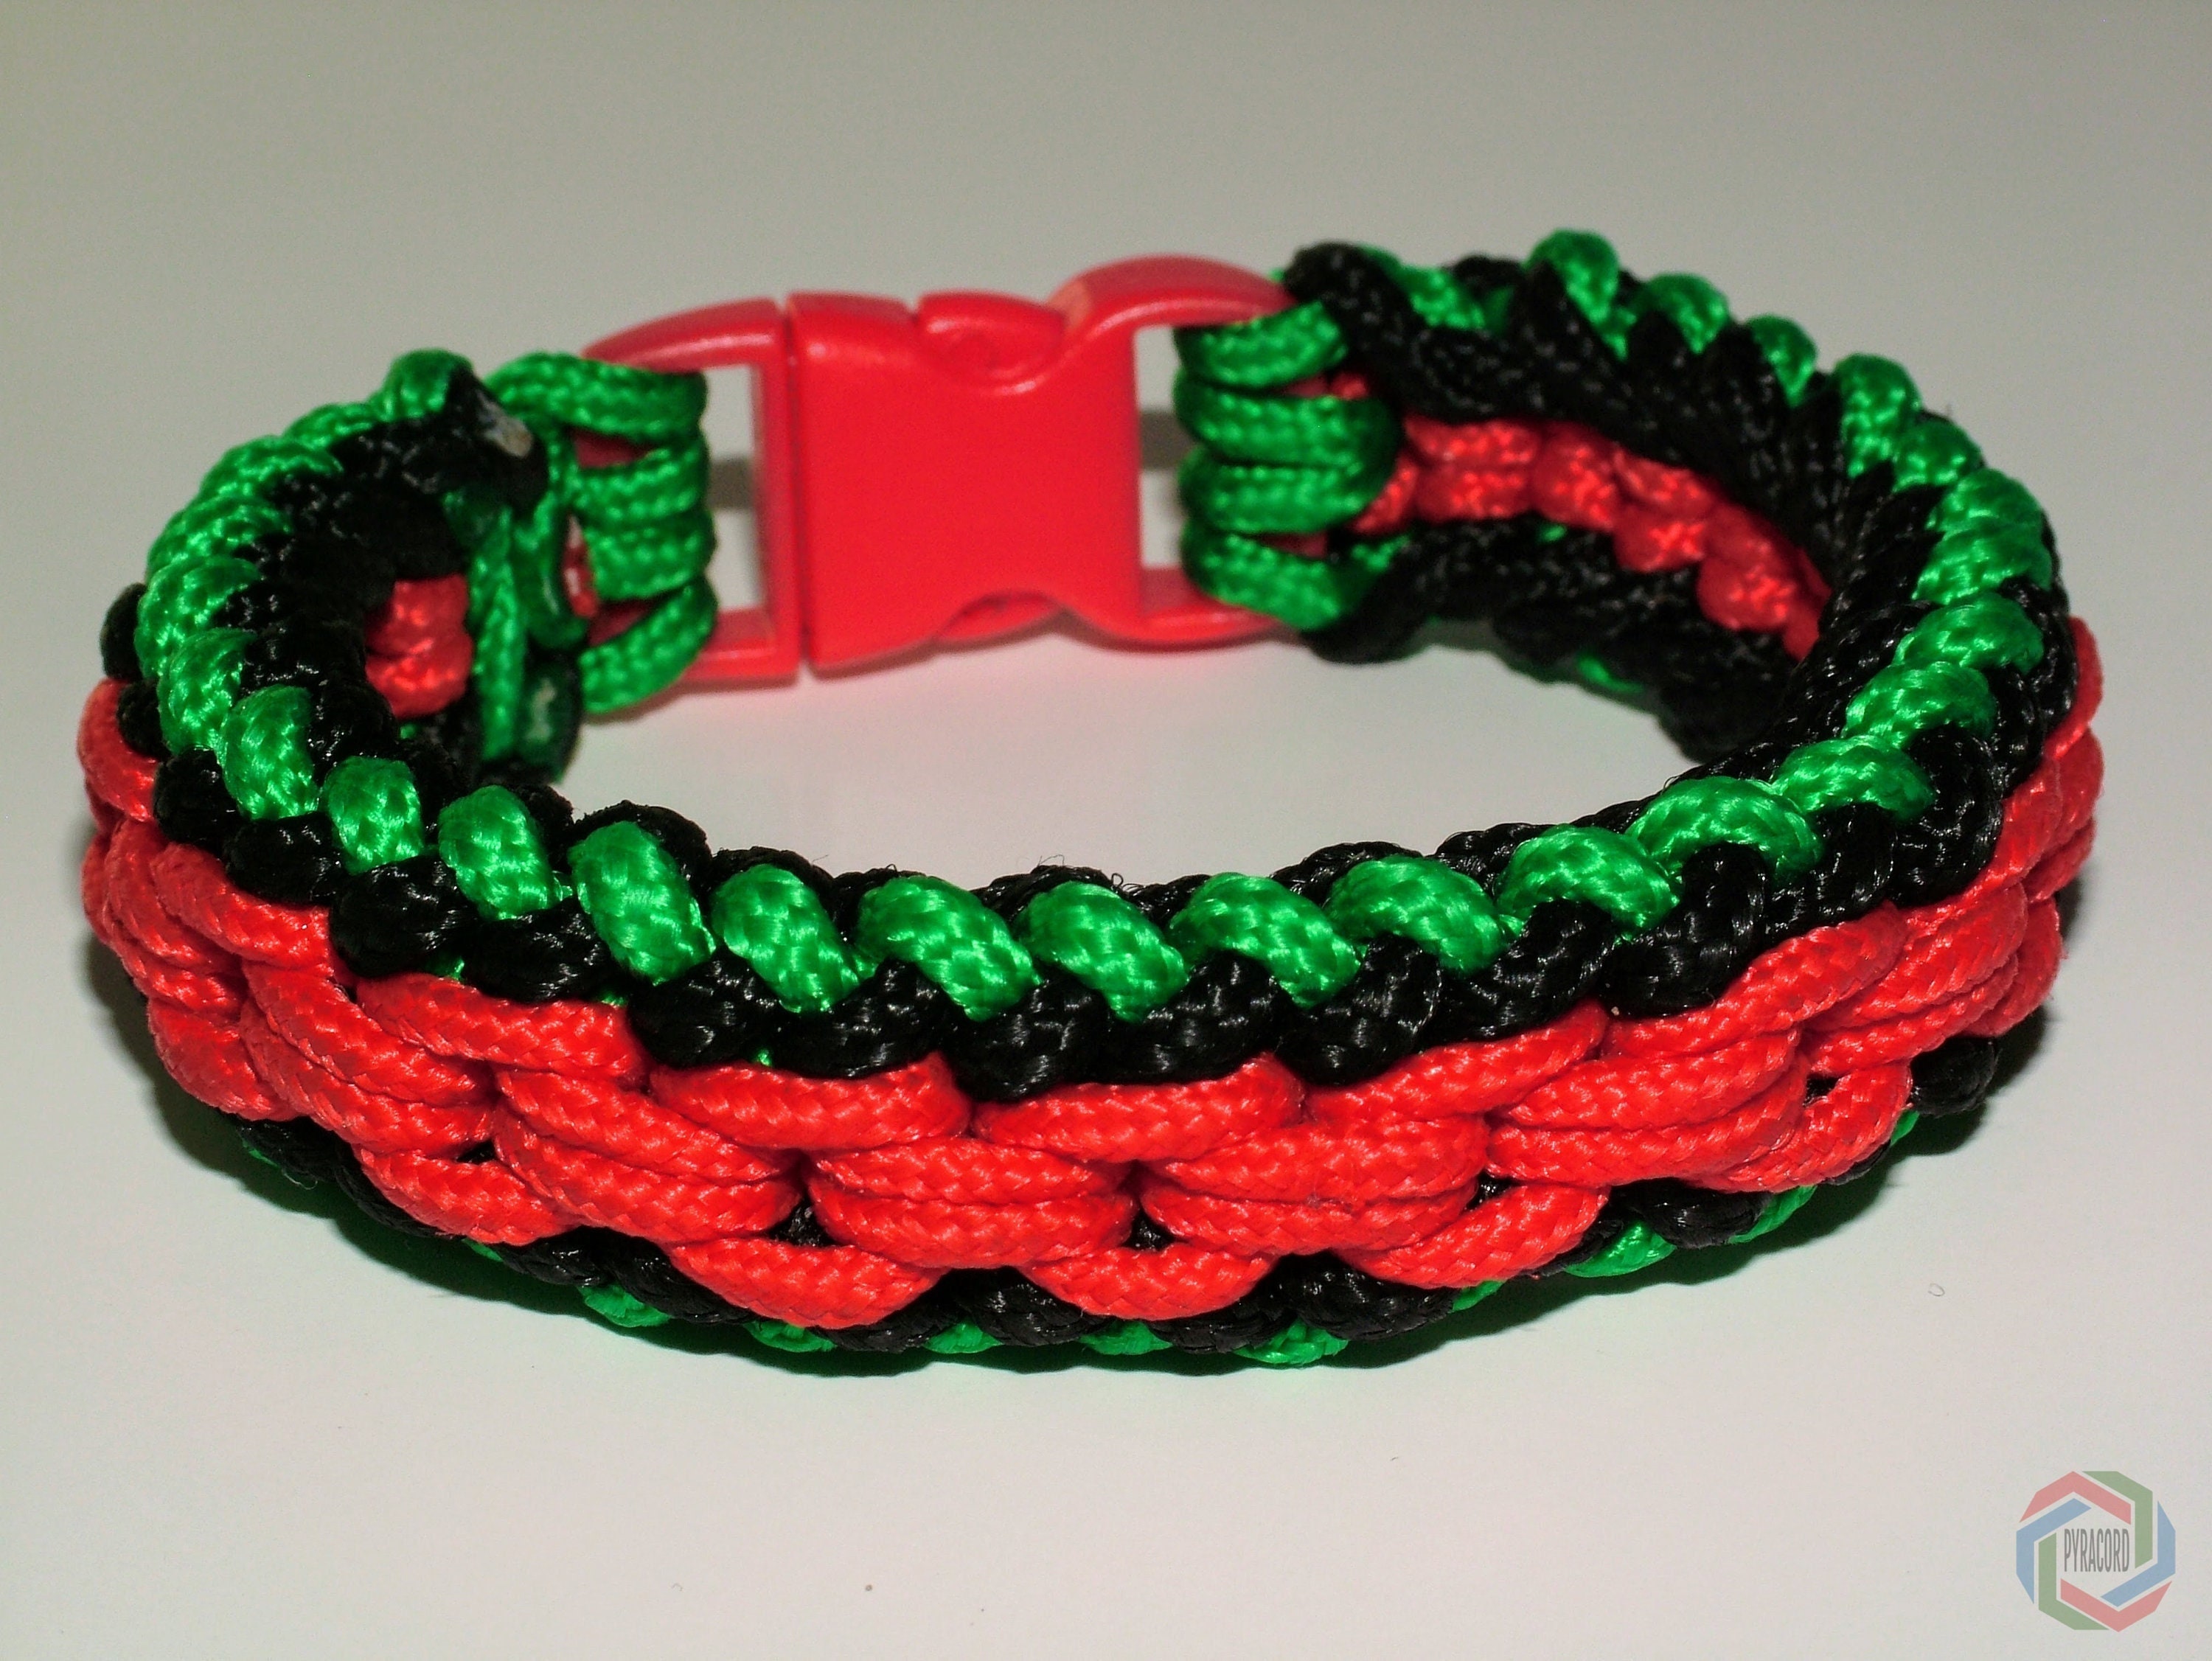 Paracord Bracelet Maker™ Paracord Jig Includes Options of Paracord and  Buckles/clasp. Ezzzy-jig From Pepperell Crafts the Beadsmith® 